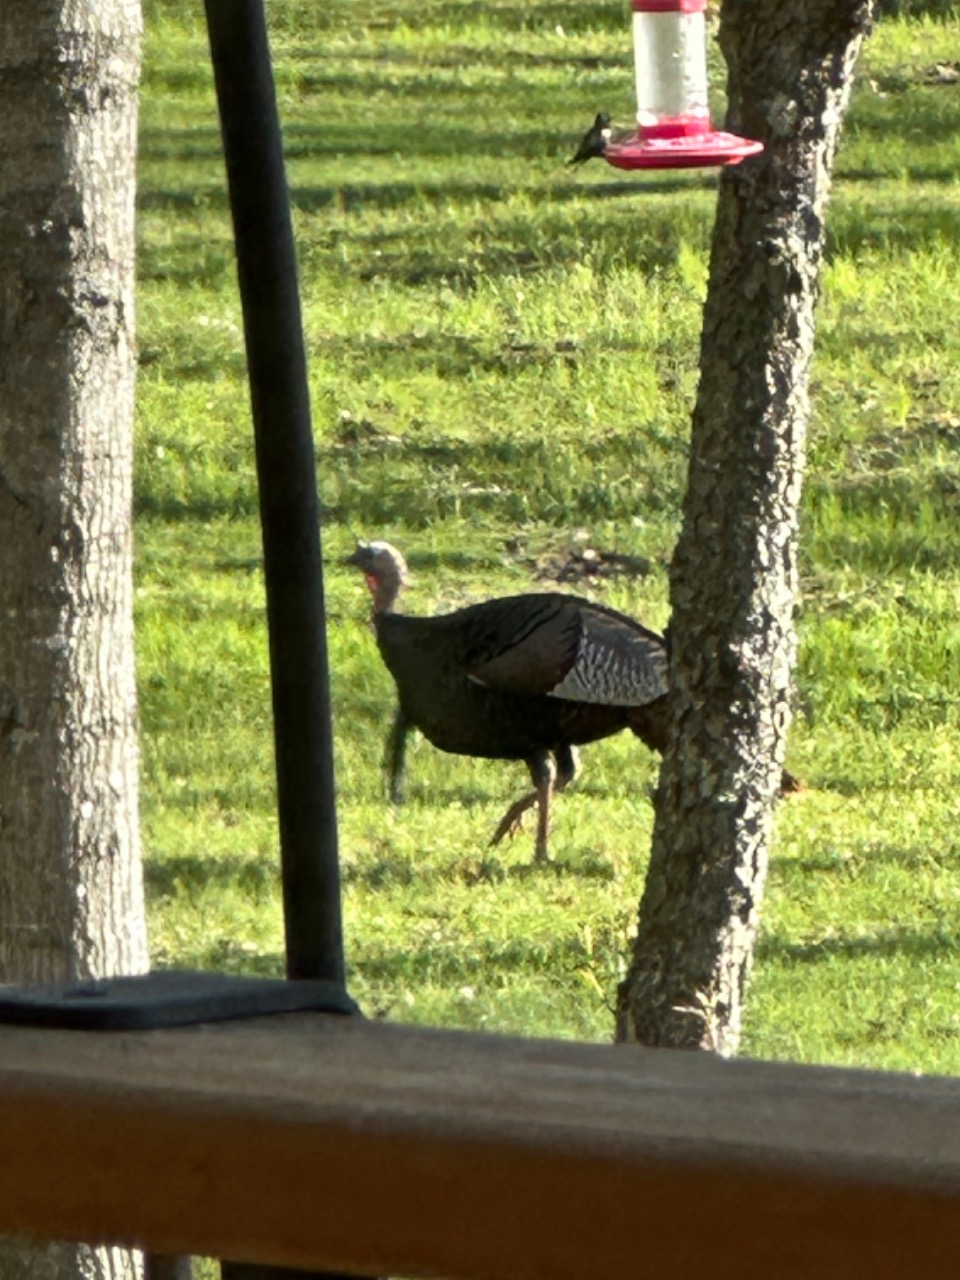 A hummingbird feeds in the foreground, with a male turkey walking by in the background